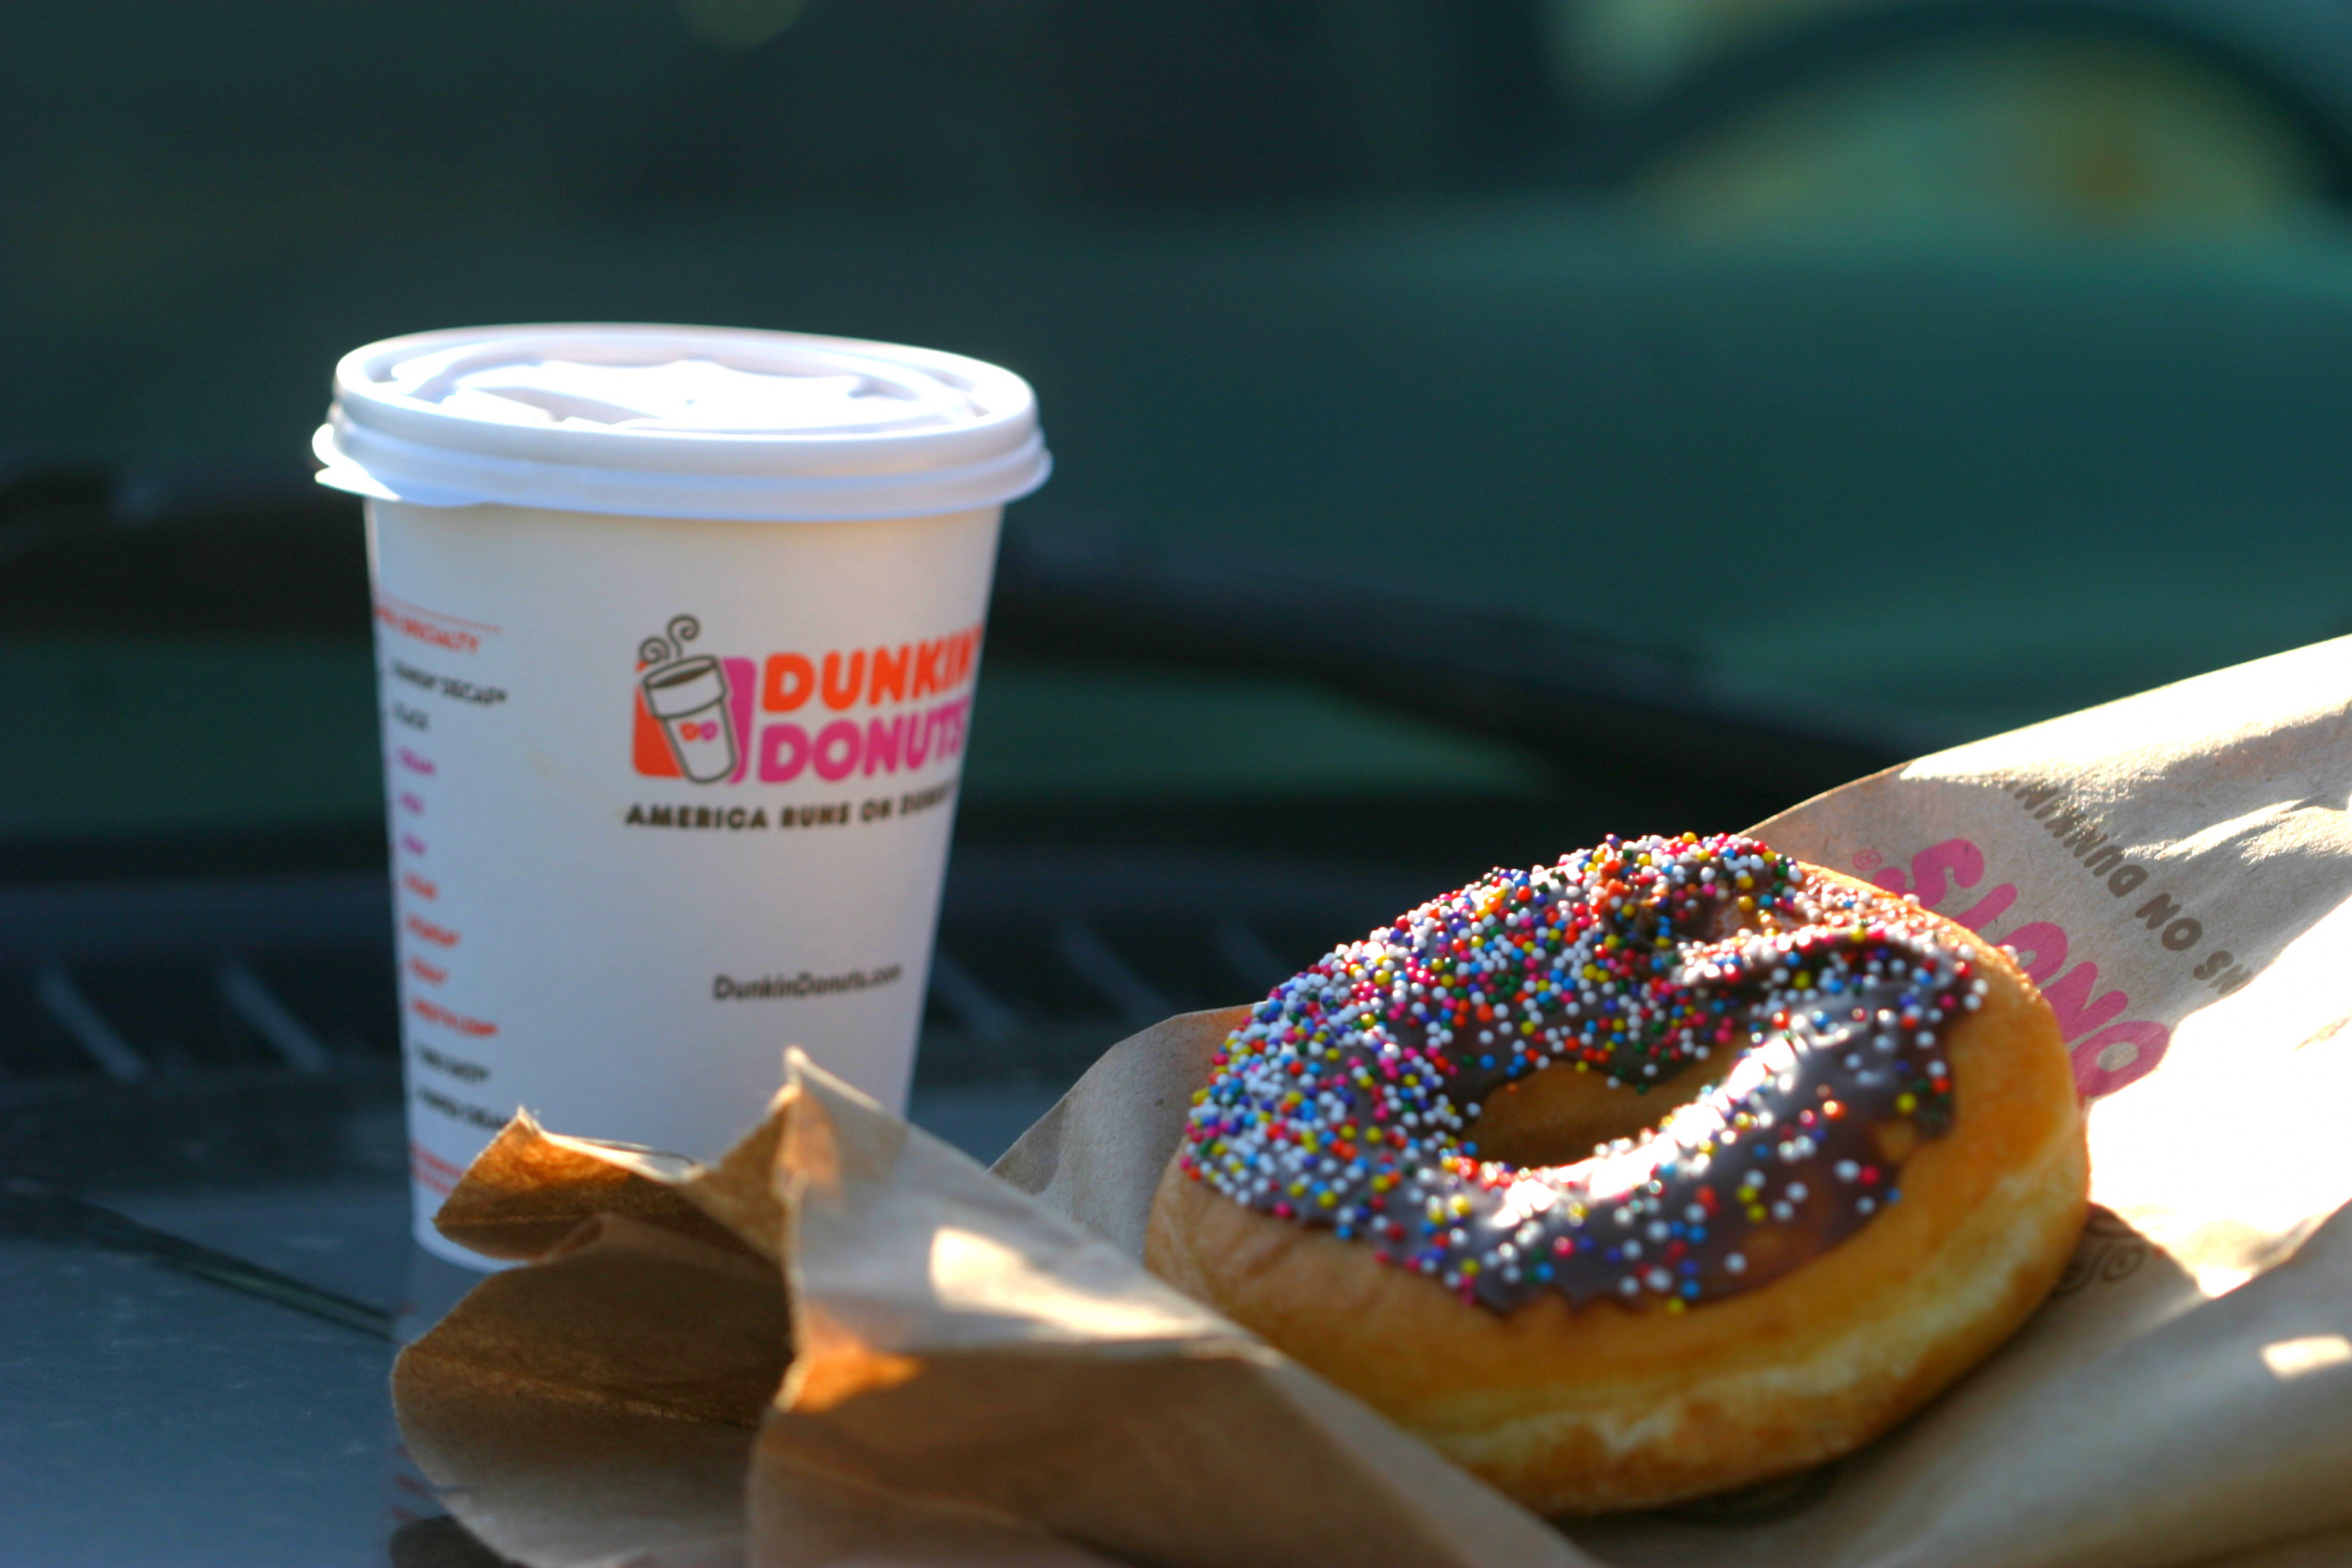 Dunkin' Donuts Launches 'Black Friday and Beyond' Offers to Keep